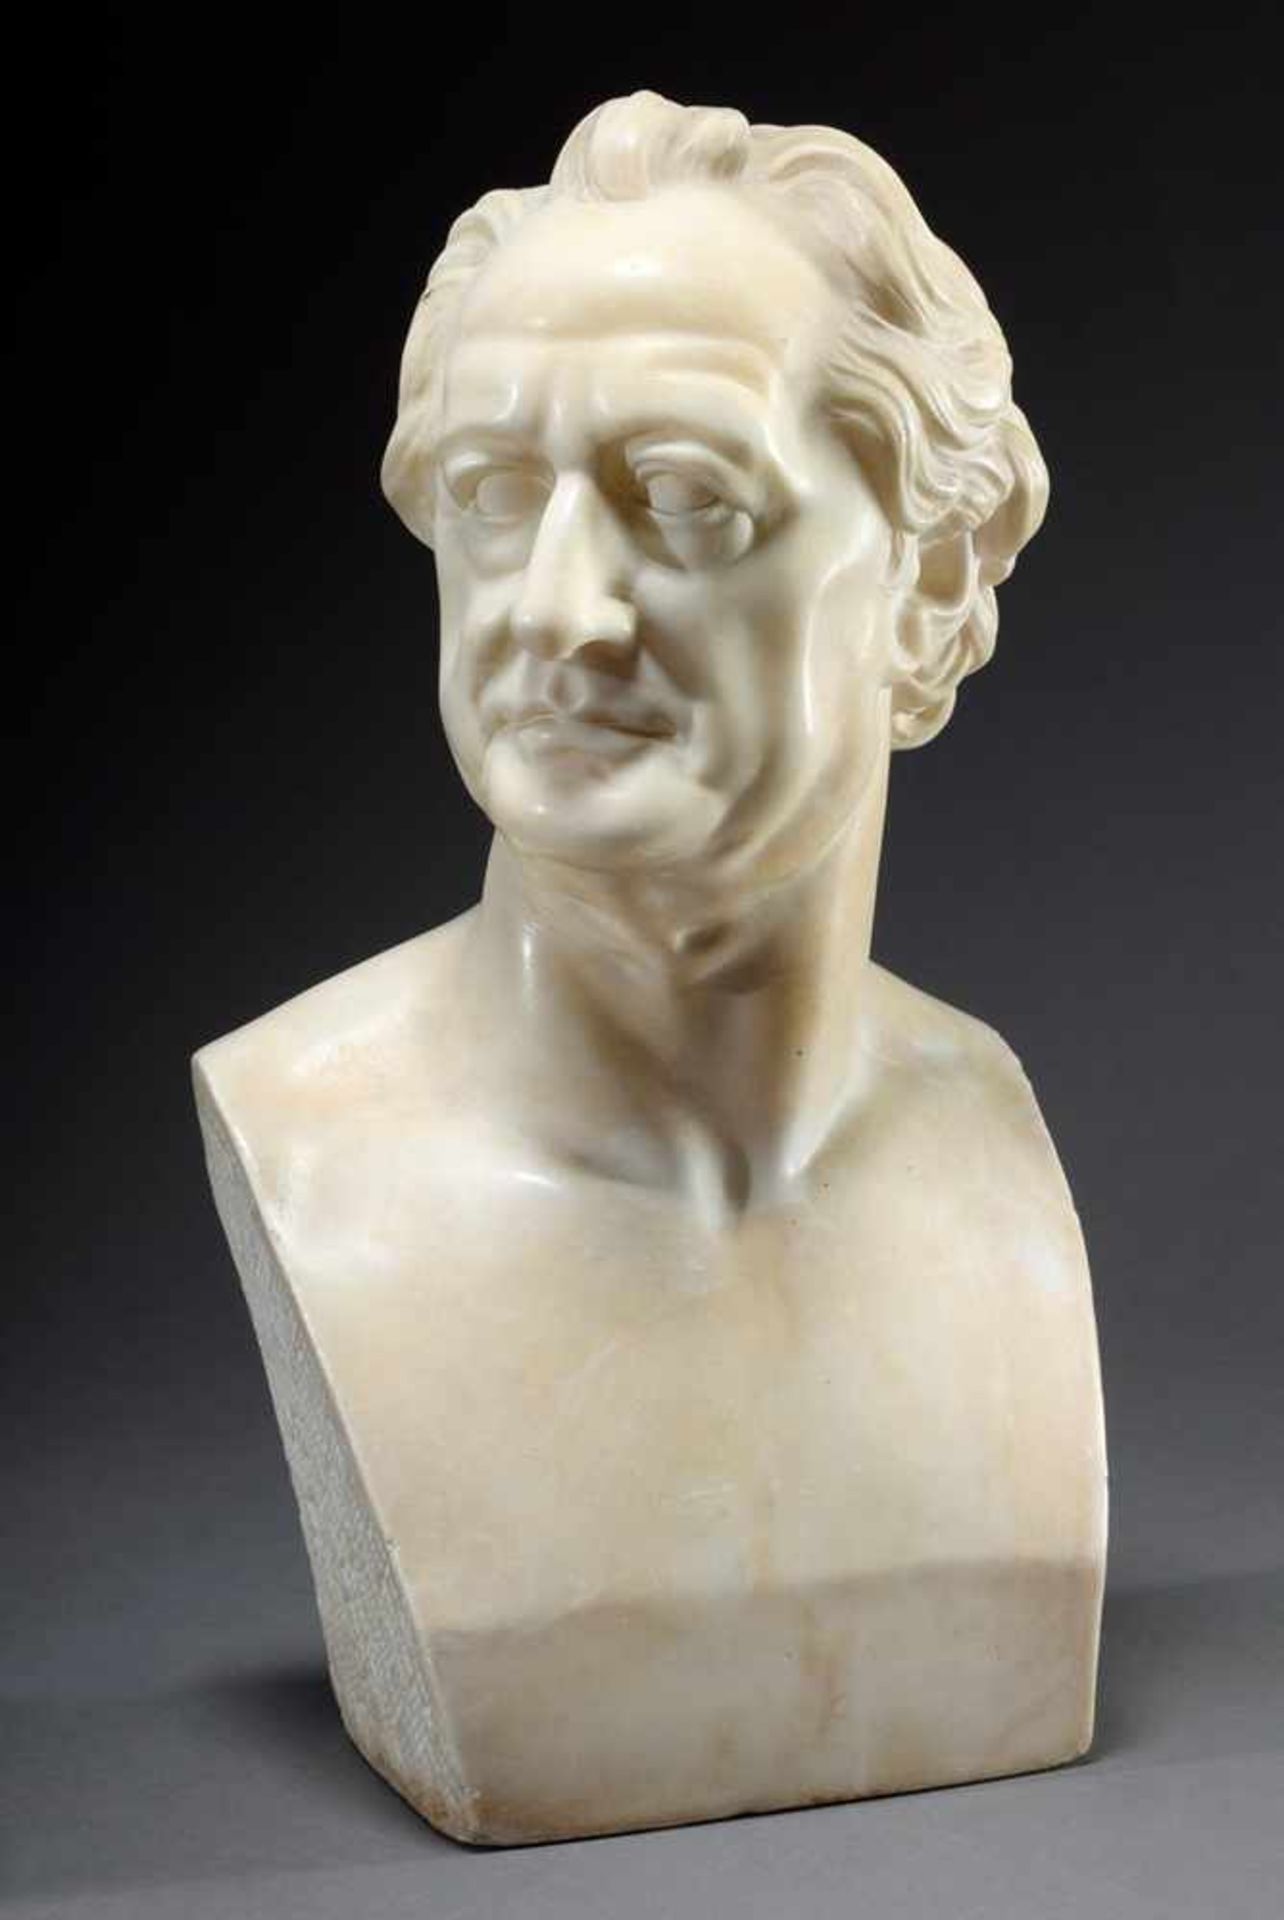 Gallet, Louis Jacques (1873-1955) "A-Tempo bust of Johann Wolfgang von Goethe" after Christian